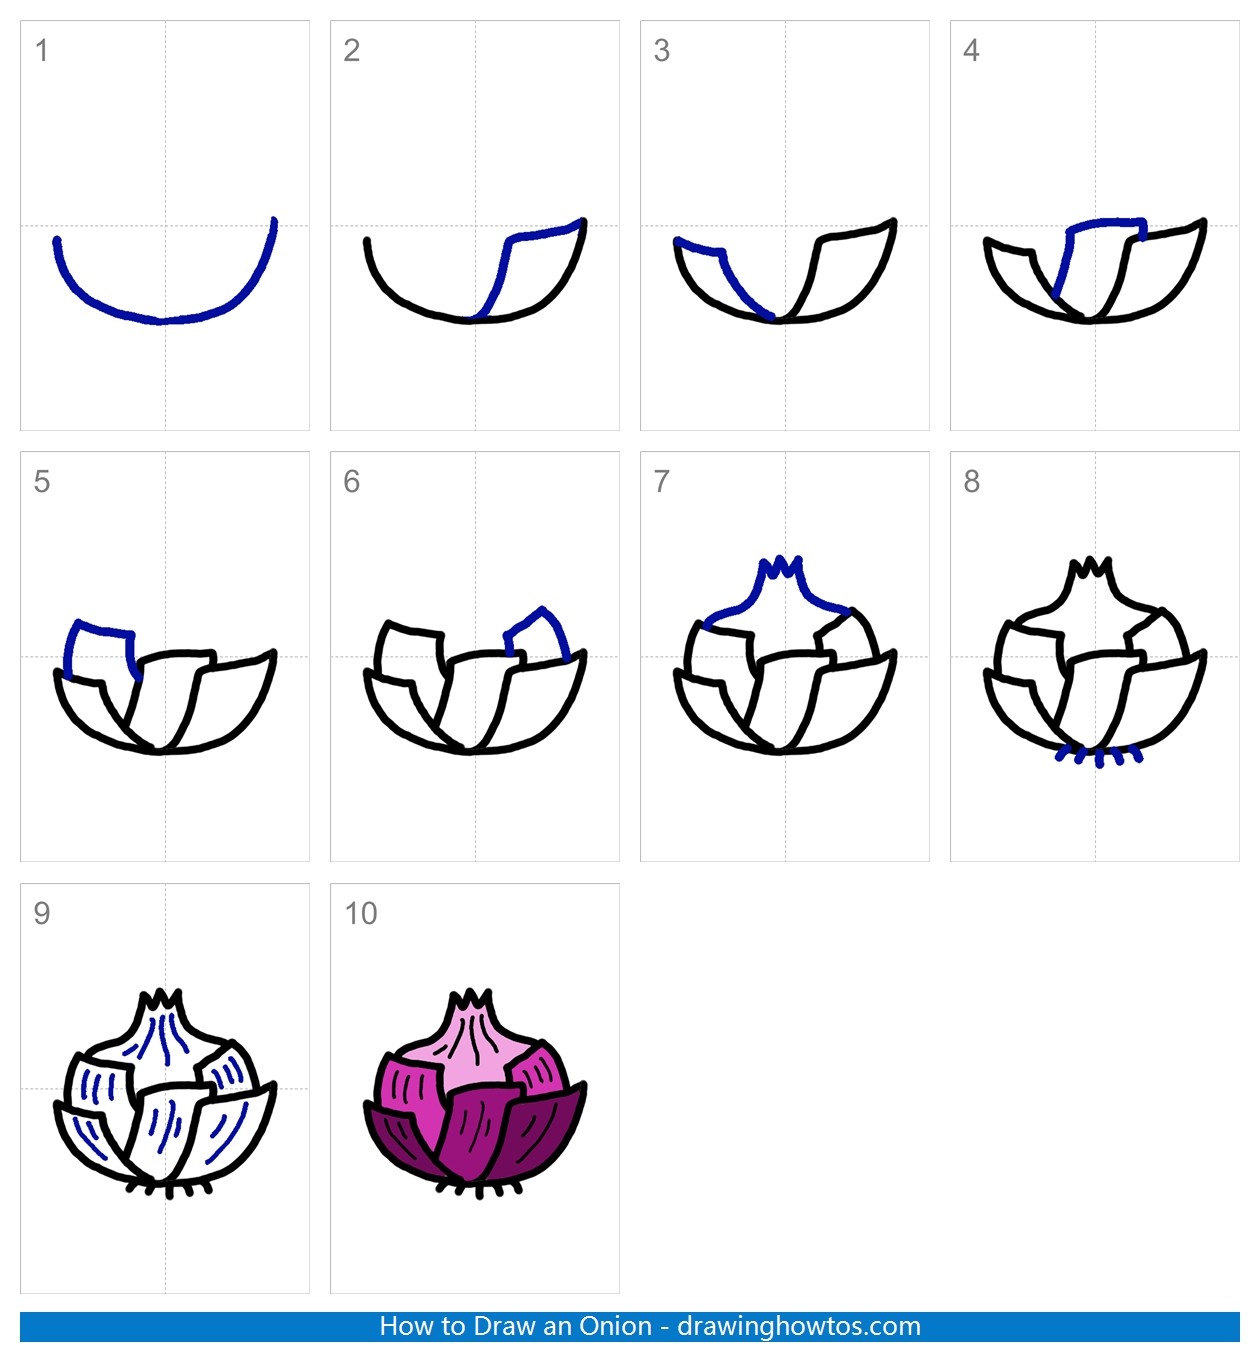 How to Draw an Onion Step by Step